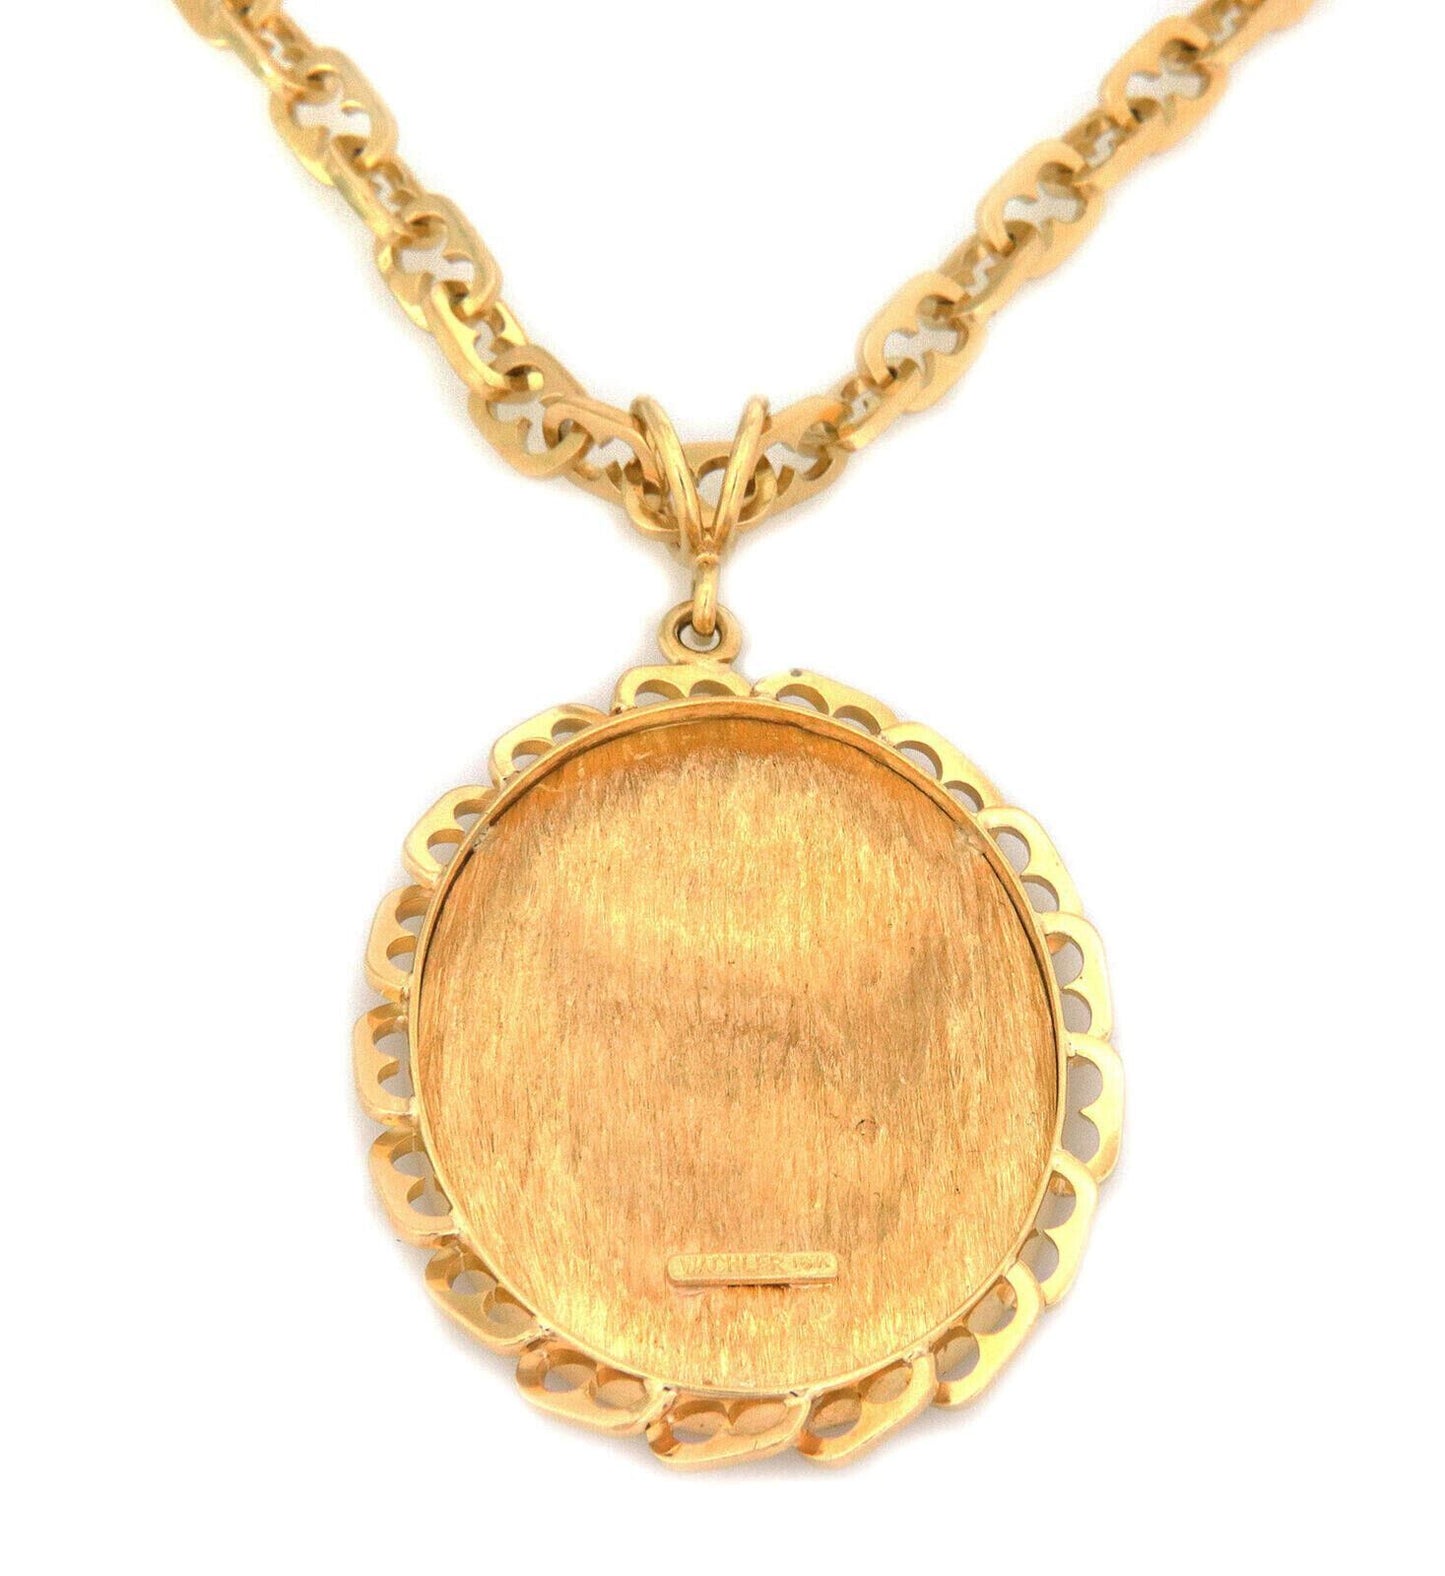 Wachler 18k Yellow Gold Embossed Cameo Oval Pendant Necklace